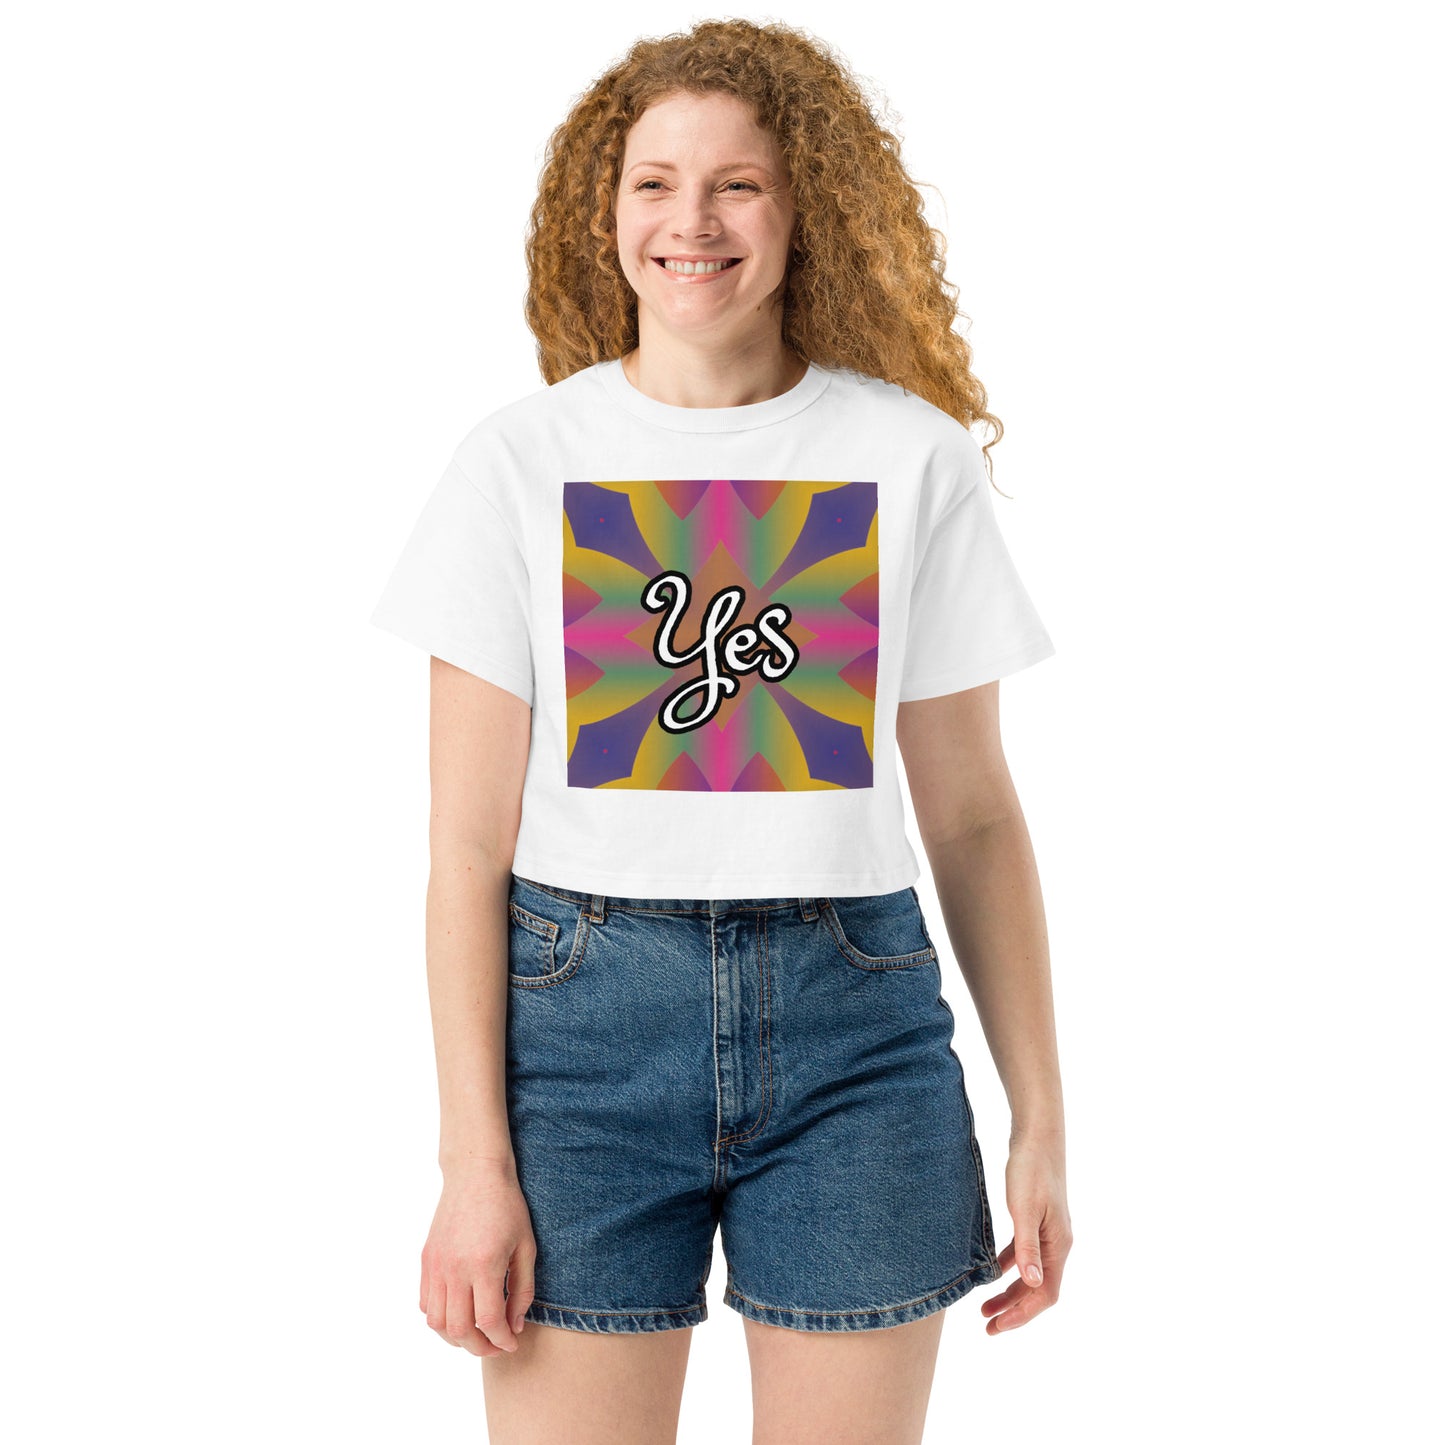 Yes - Champion crop top